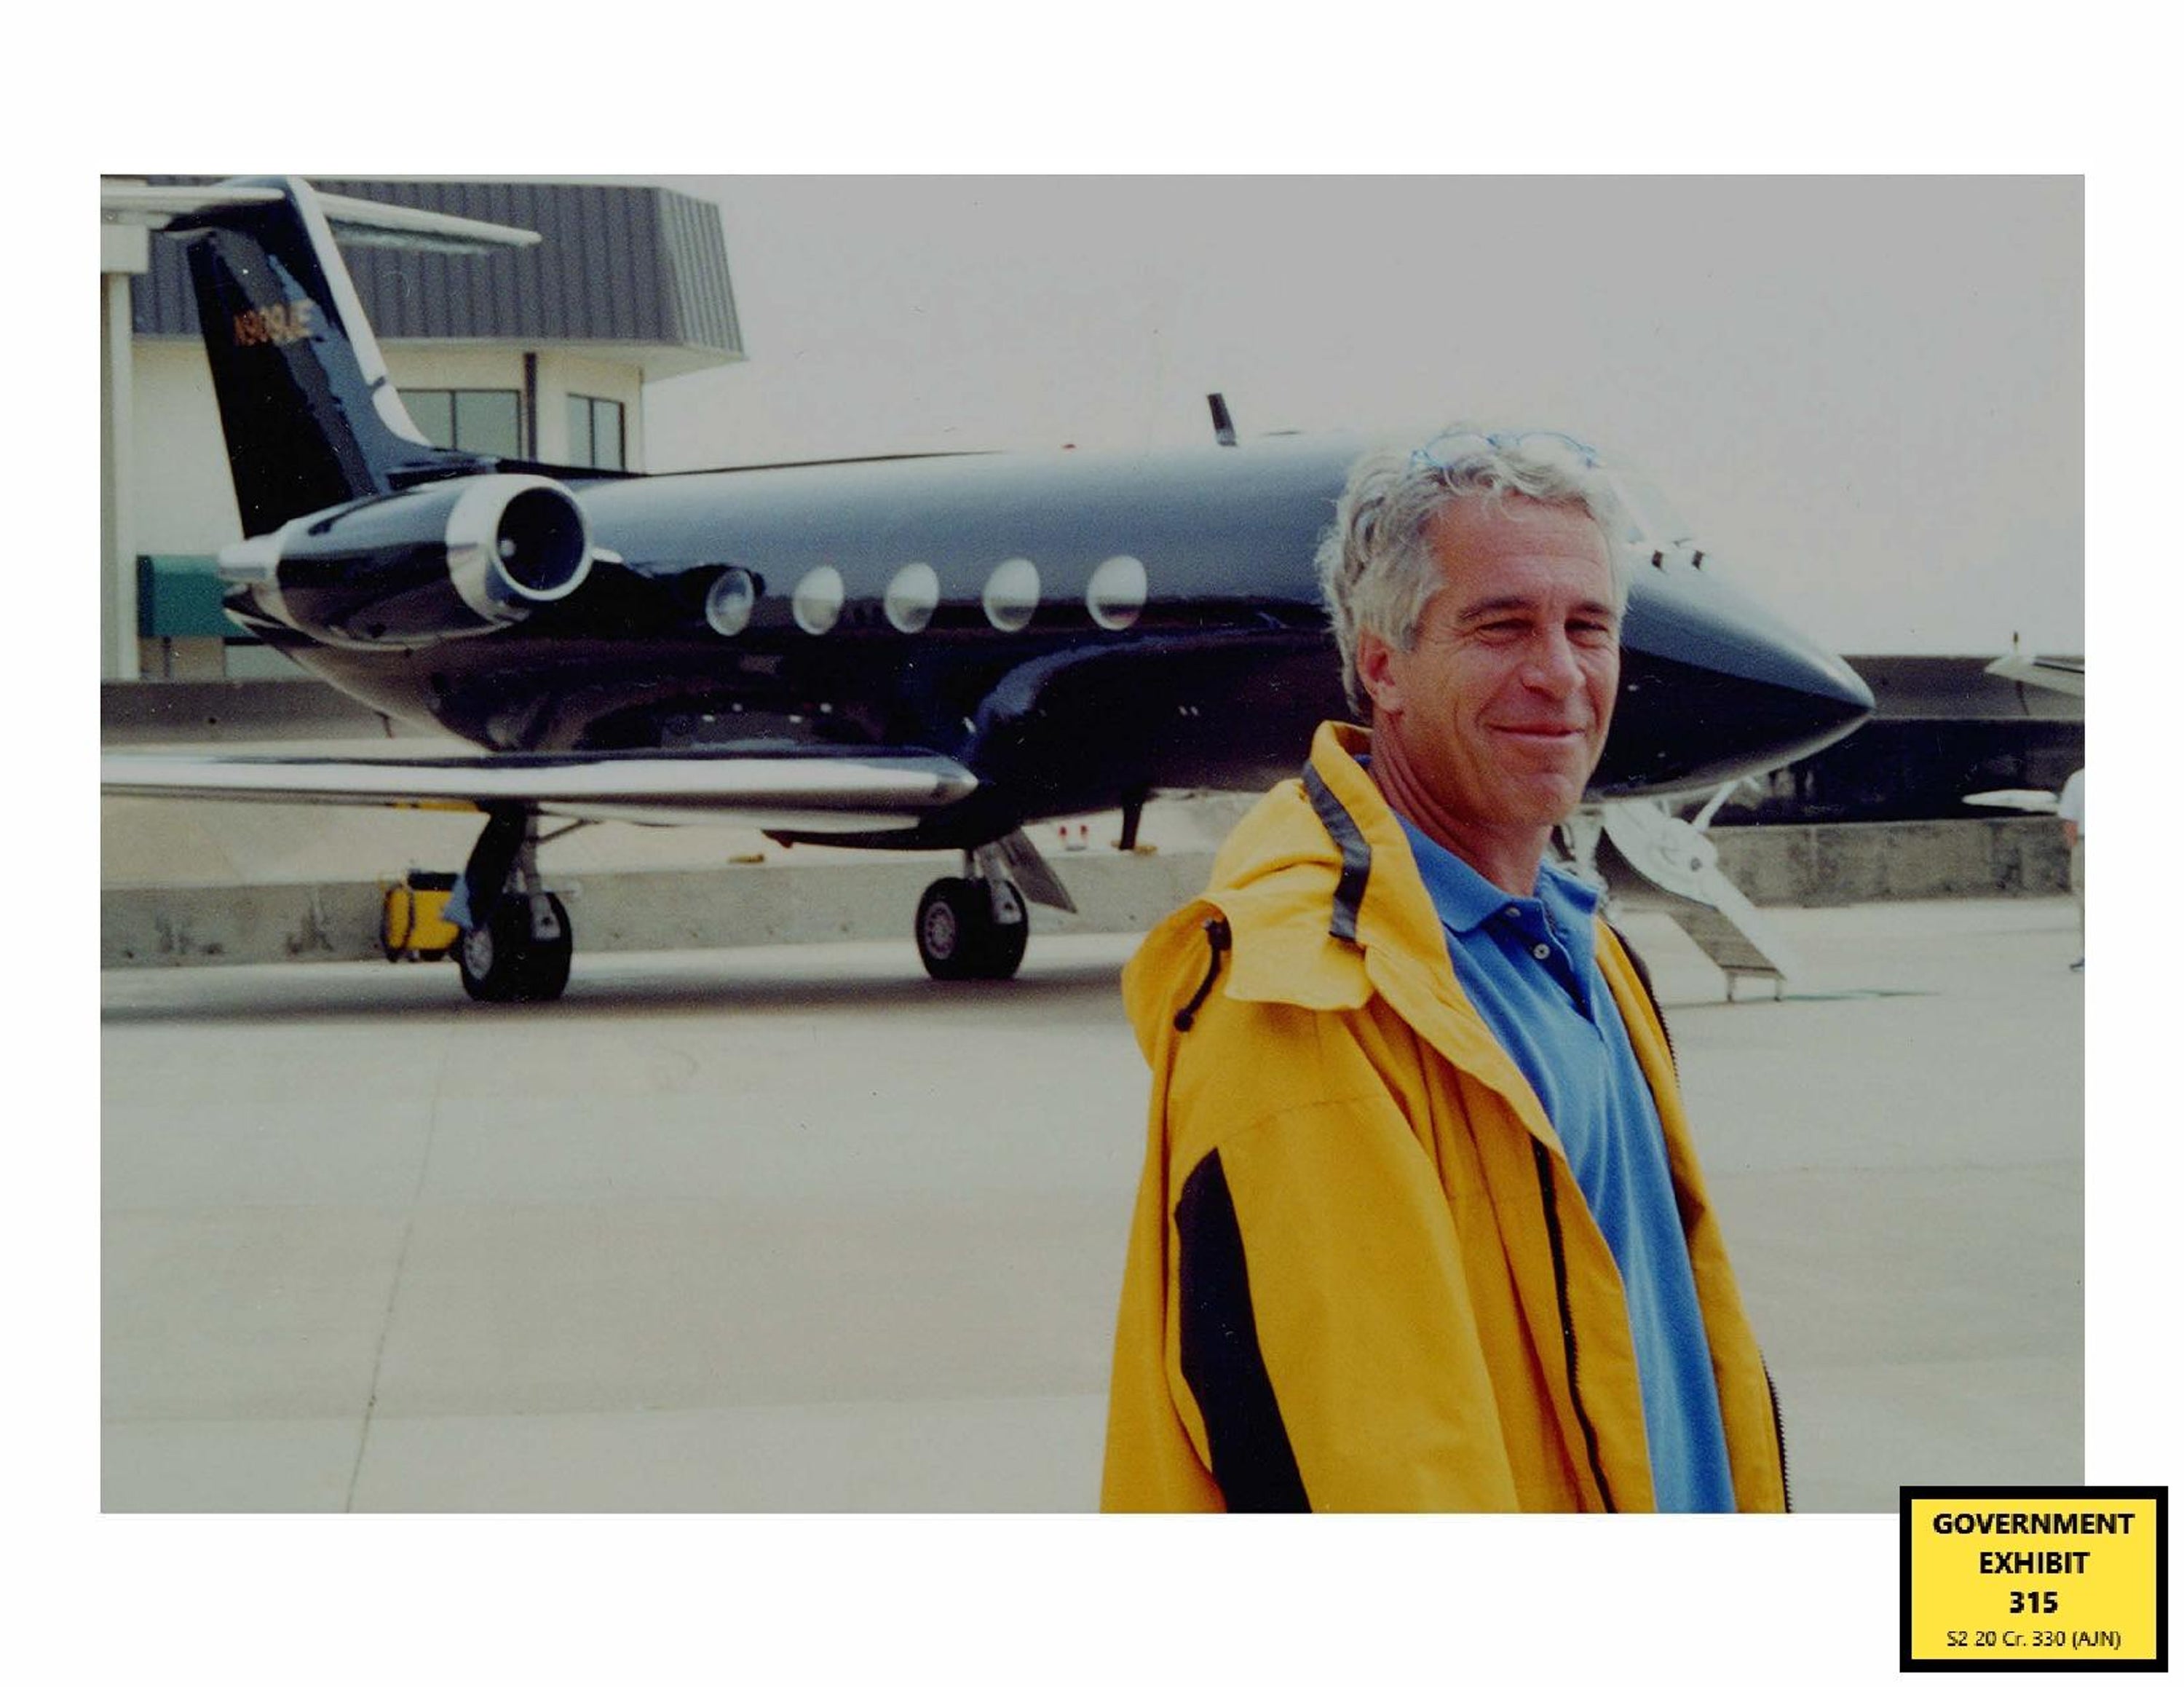 Jeffrey Epstein owned several private jets